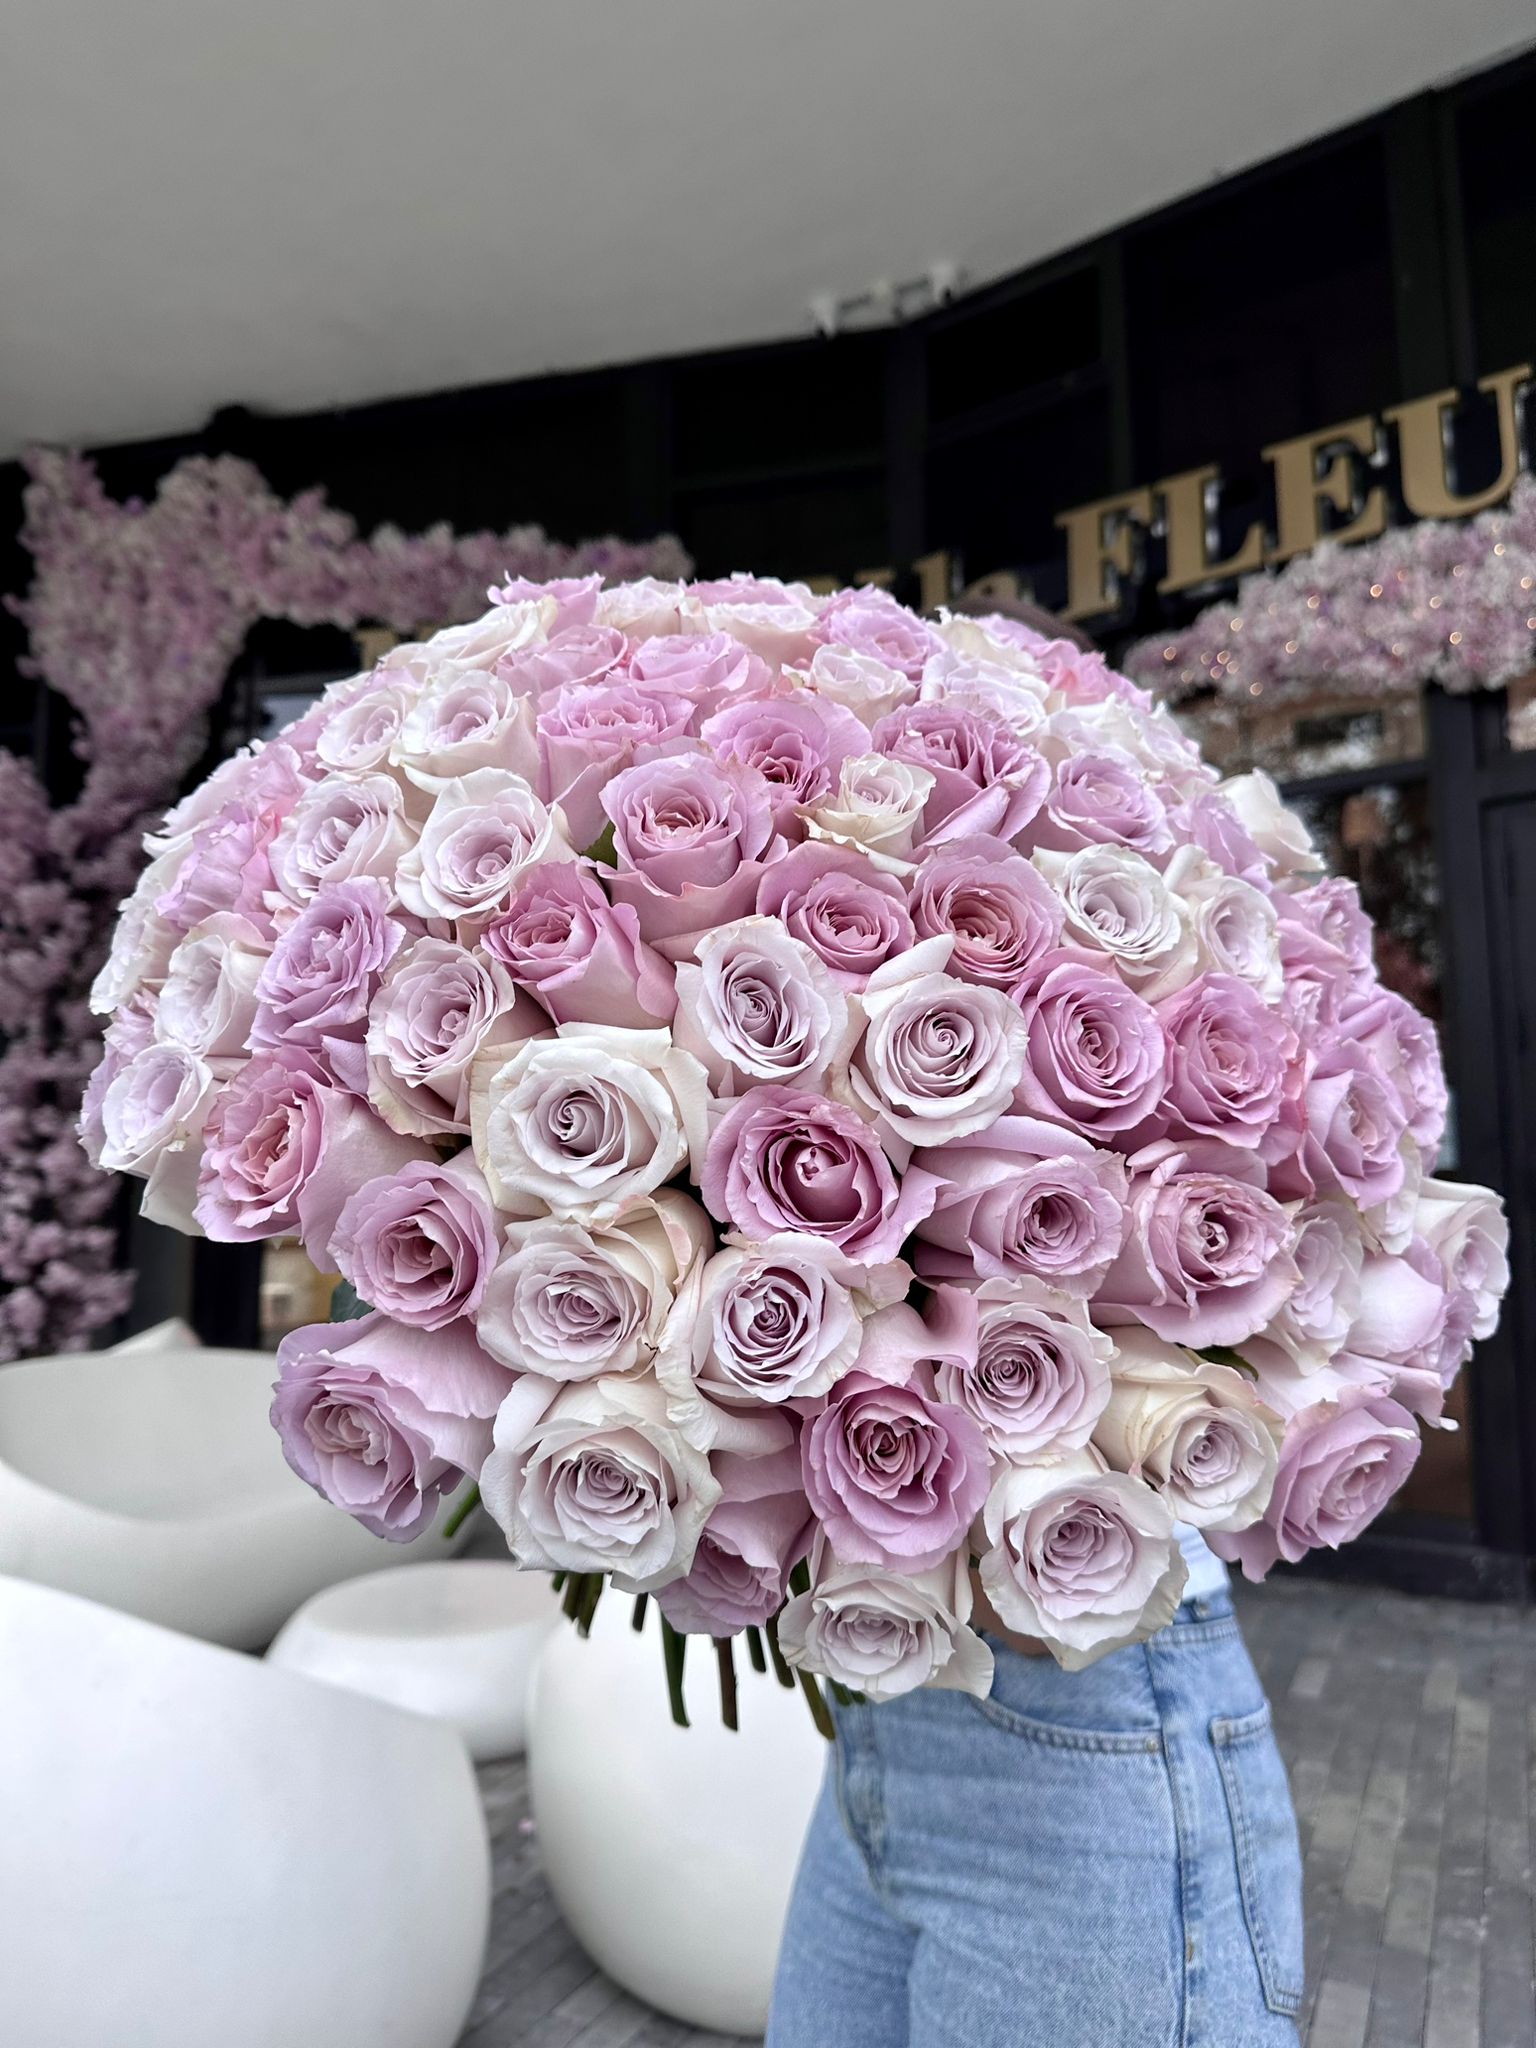 Do you LILAC it? 100 roses - lilac roses